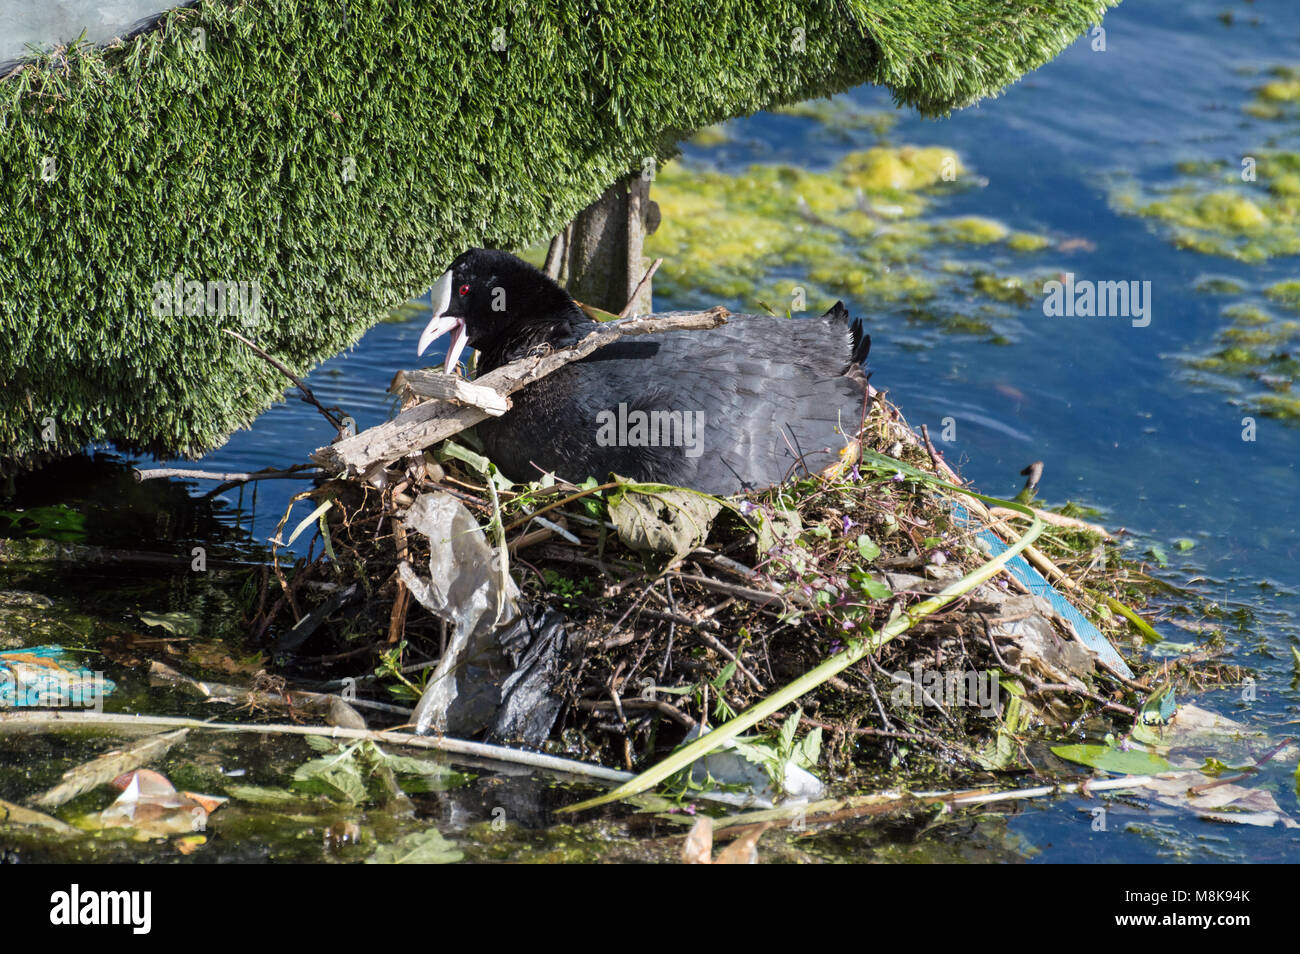 A close up of a single Coot with a stick in it's beak, building a nest with twigs, sticks, lichen, moss and grass on a blurred background of the lake. Stock Photo